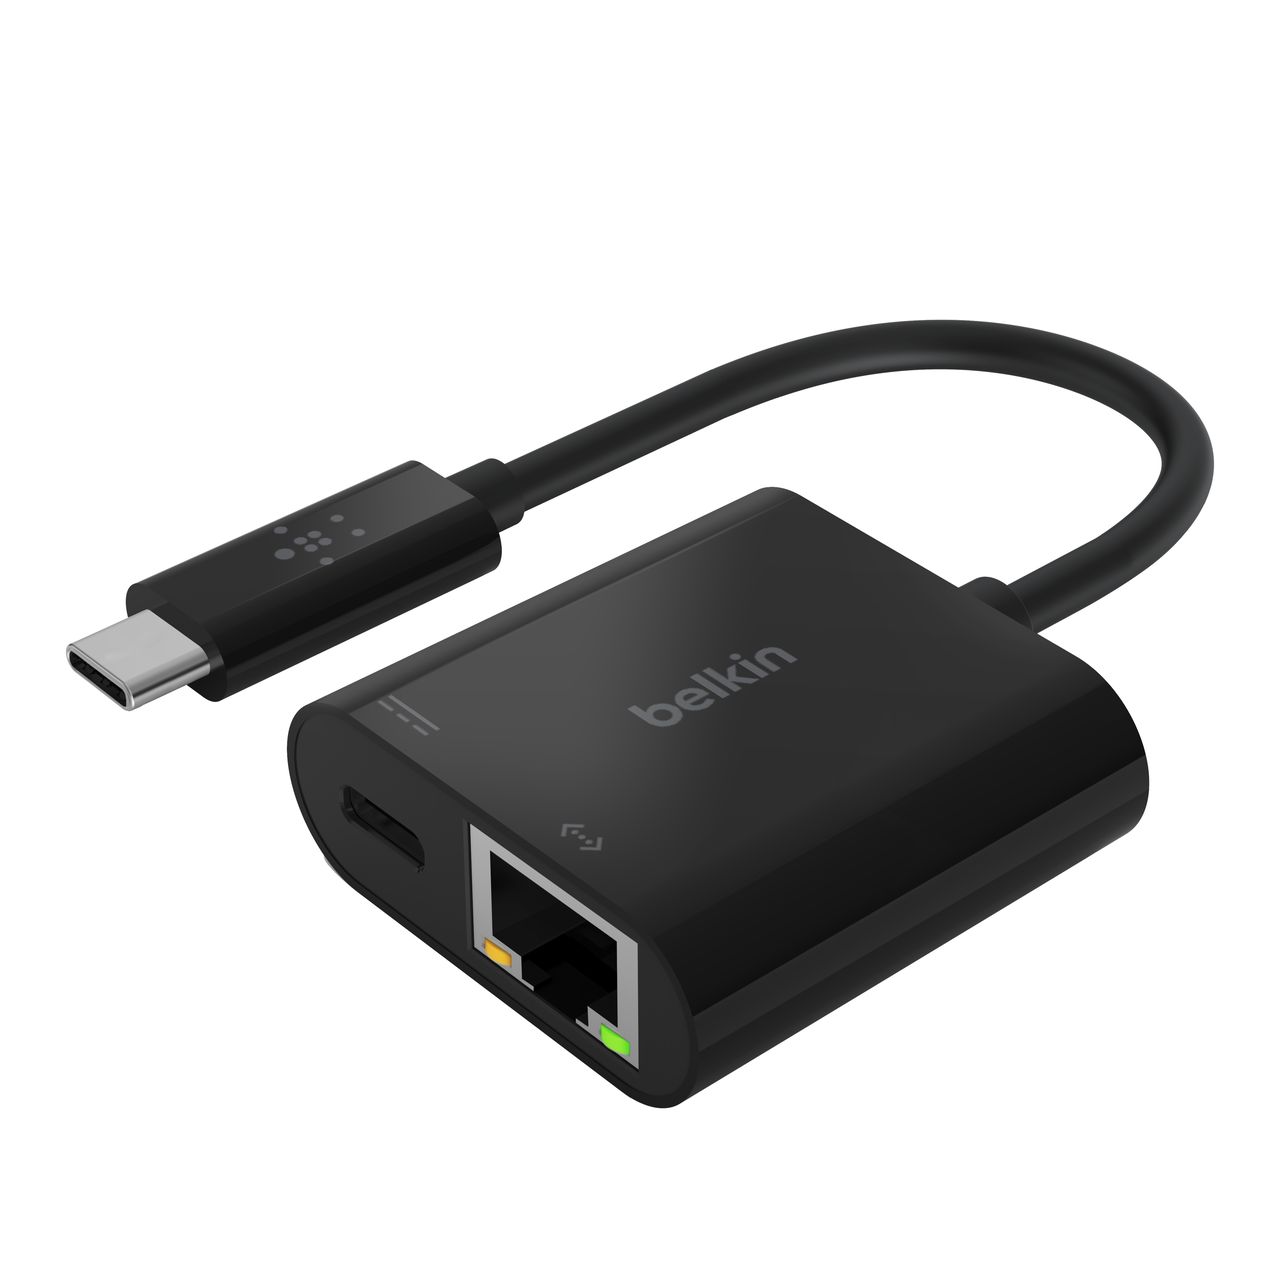 14 Best Ethernet To USB Adapters for 2023